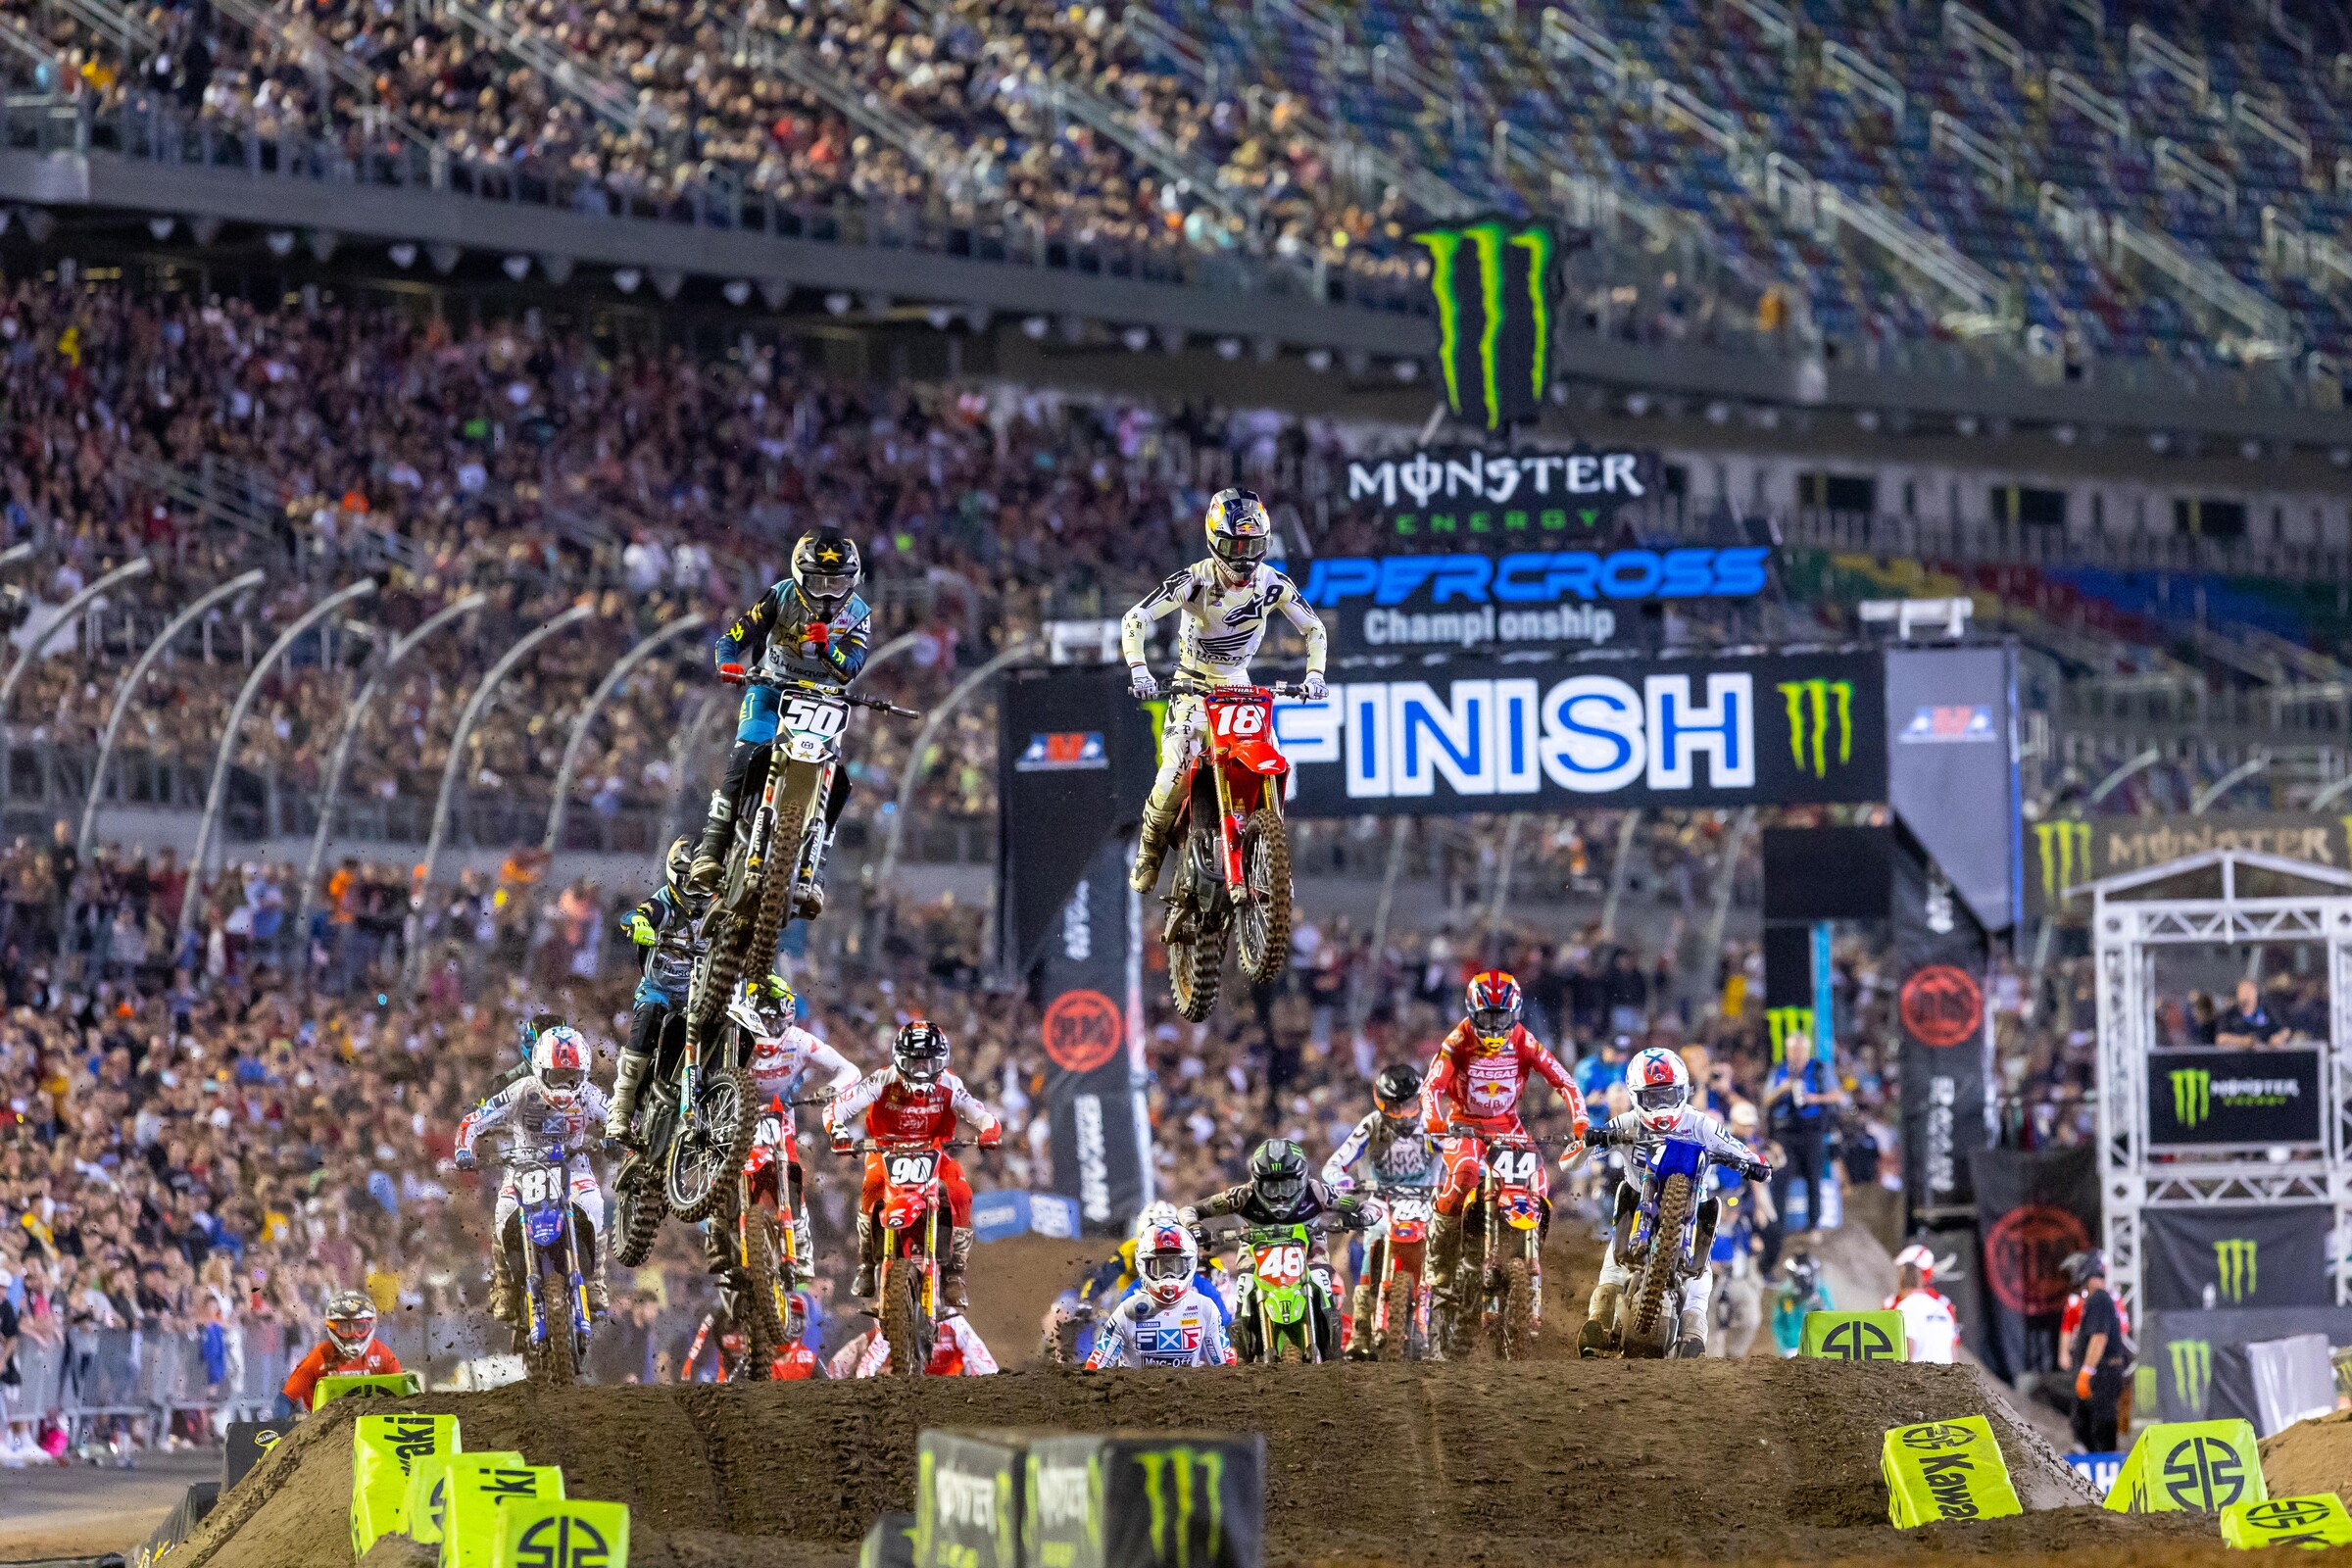 SuperMotocross Video Pass to Debut for International Viewership